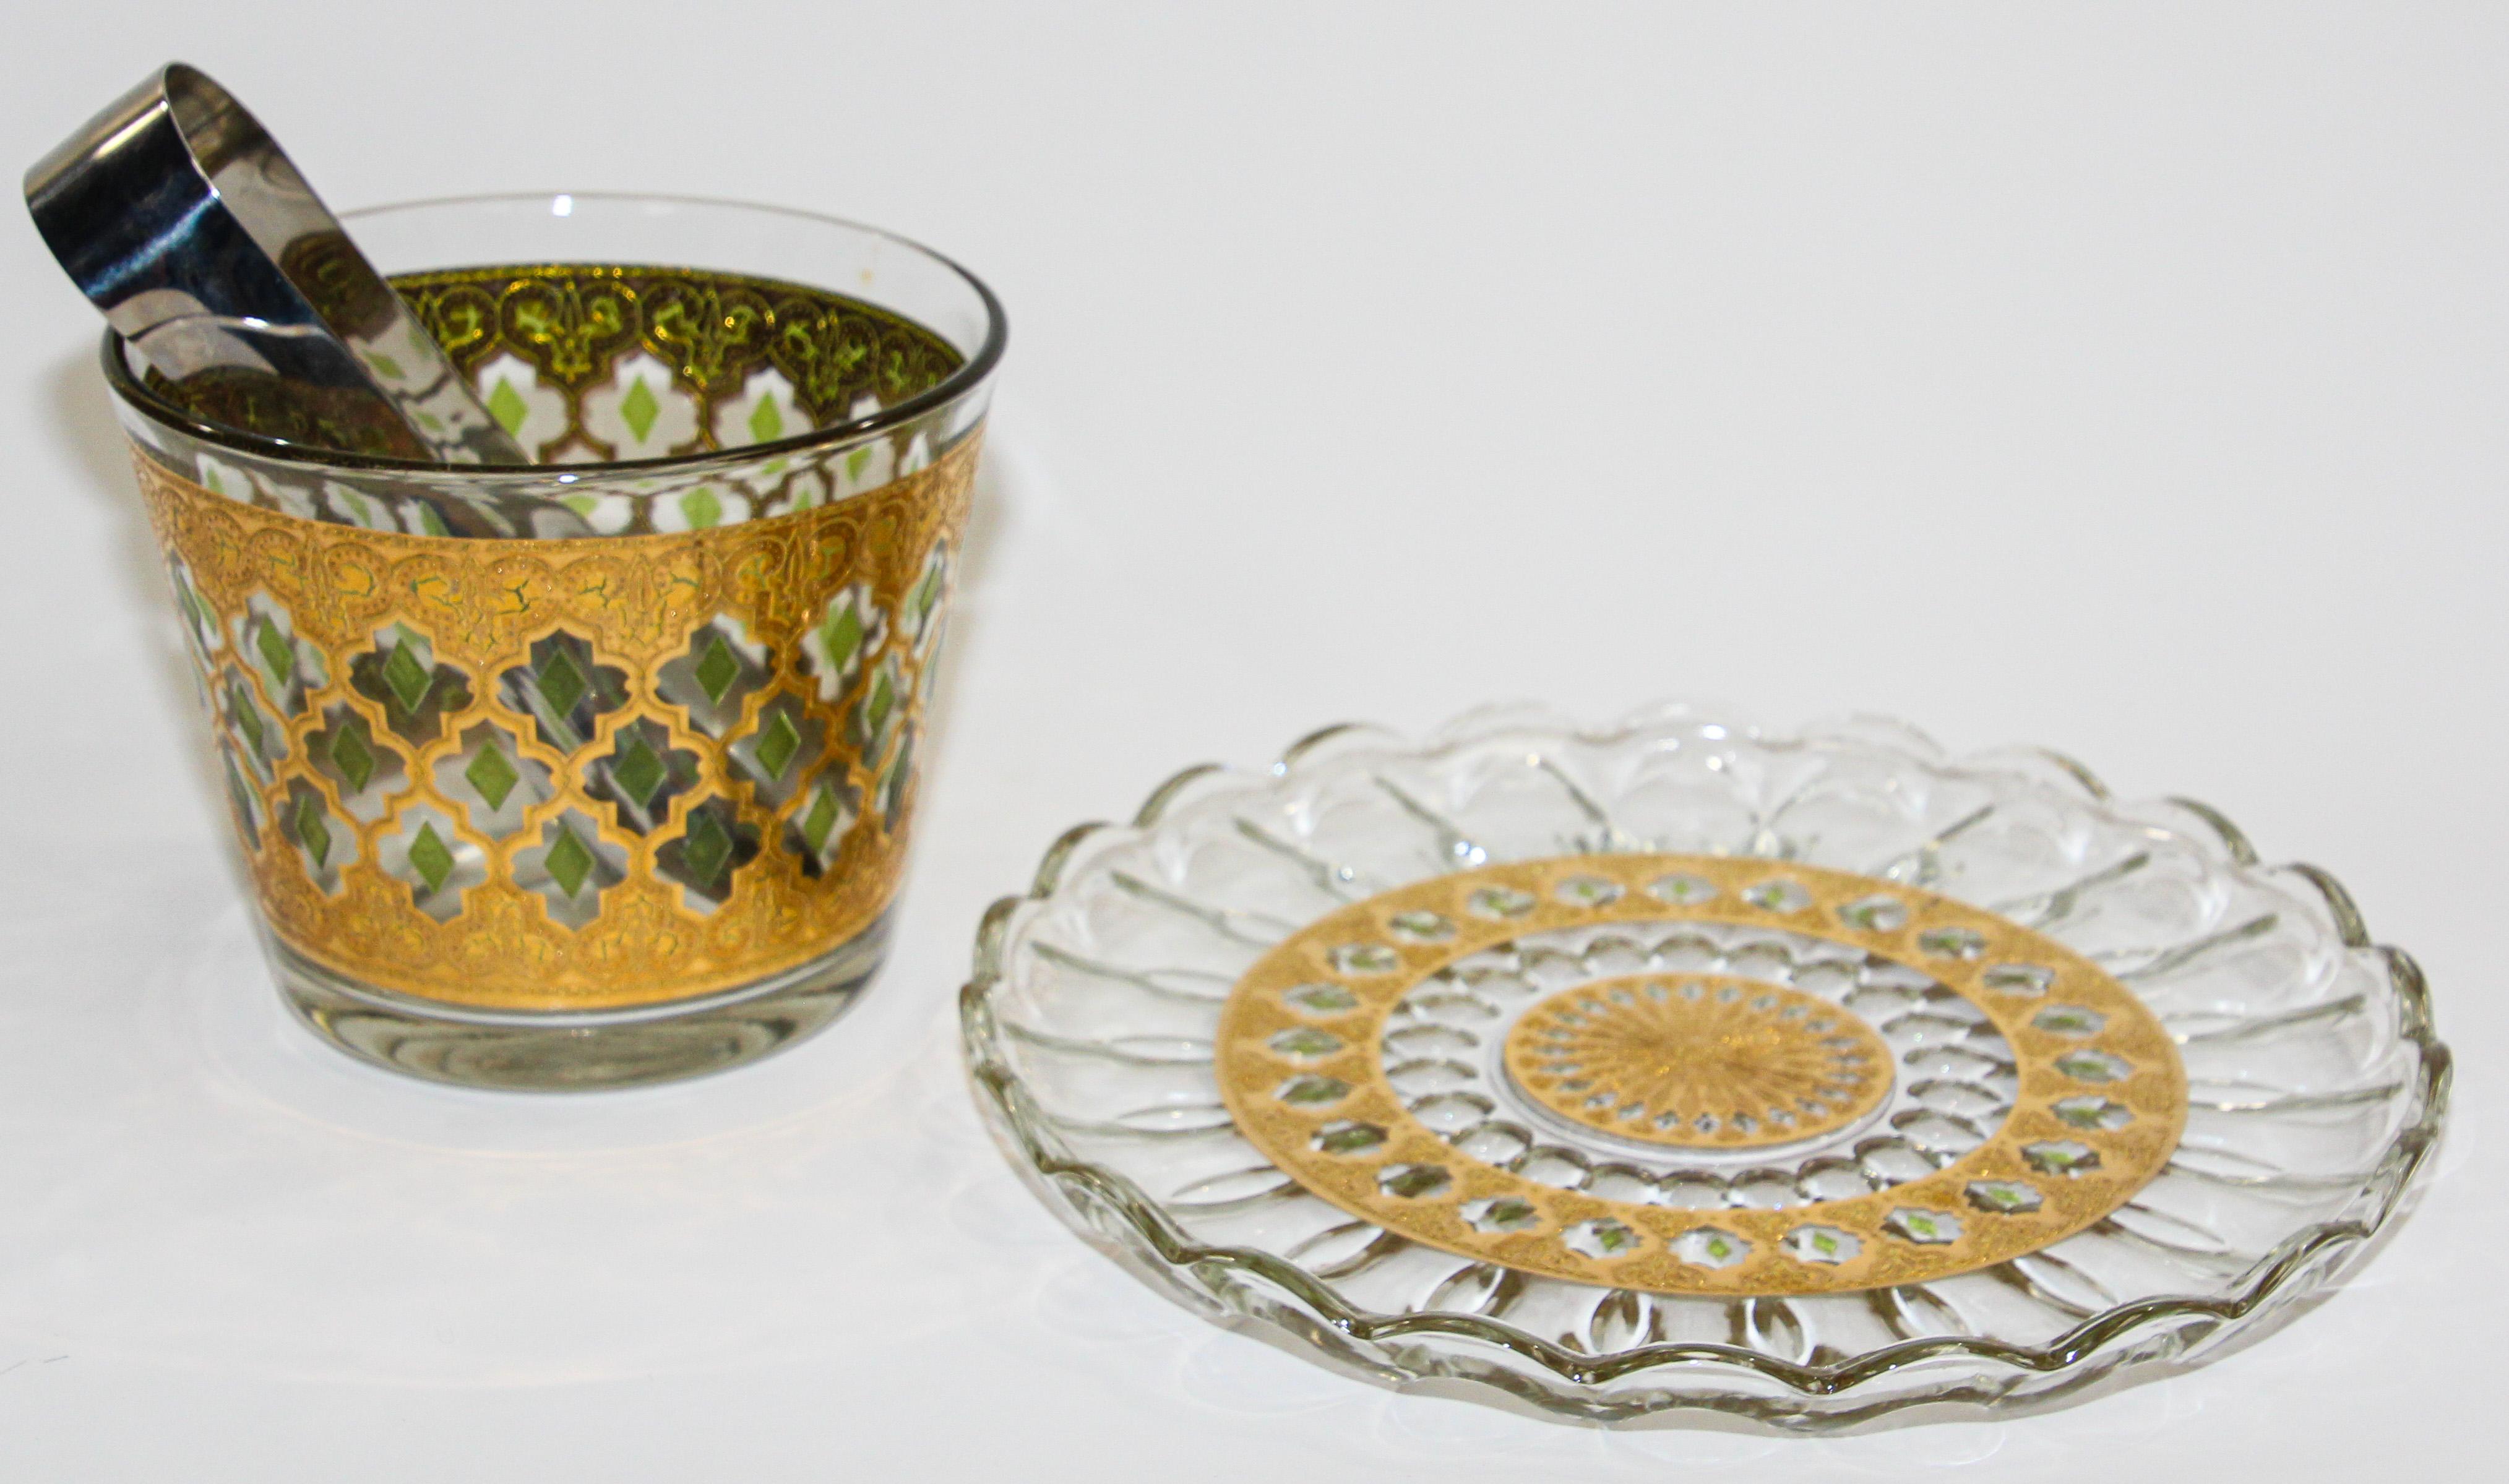 Exquisite vintage mid-century 22-karat gold leaf ice bucket and plate by Culver, 1960s
Valencia Moorish designs.
Highly ornate 22-karat gold textured filigree design with raised green diamond accents.
These all must be hand washed with a mild